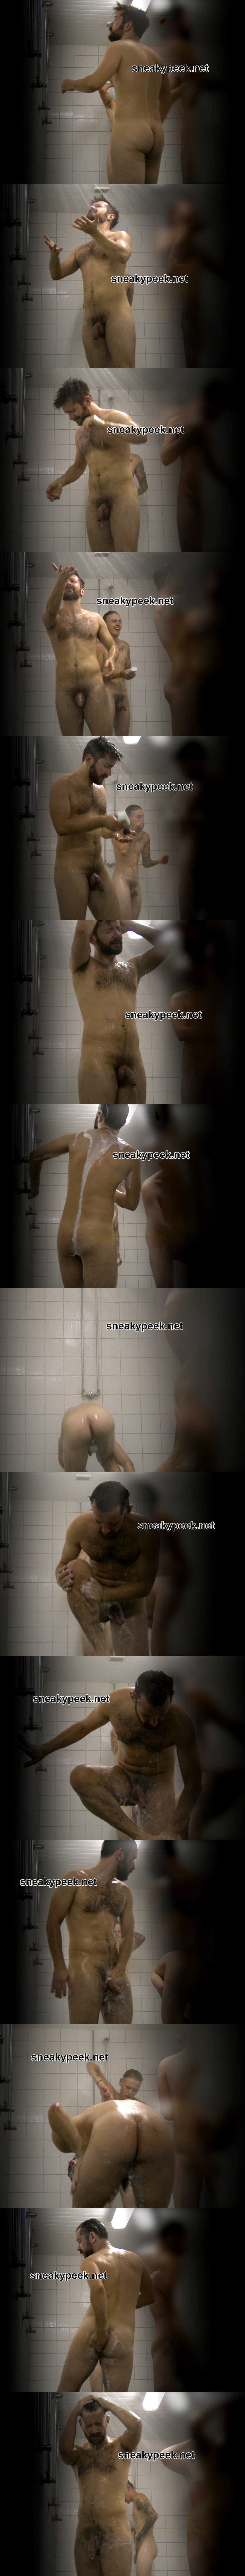 sexy hairy man caught showering by spy camera